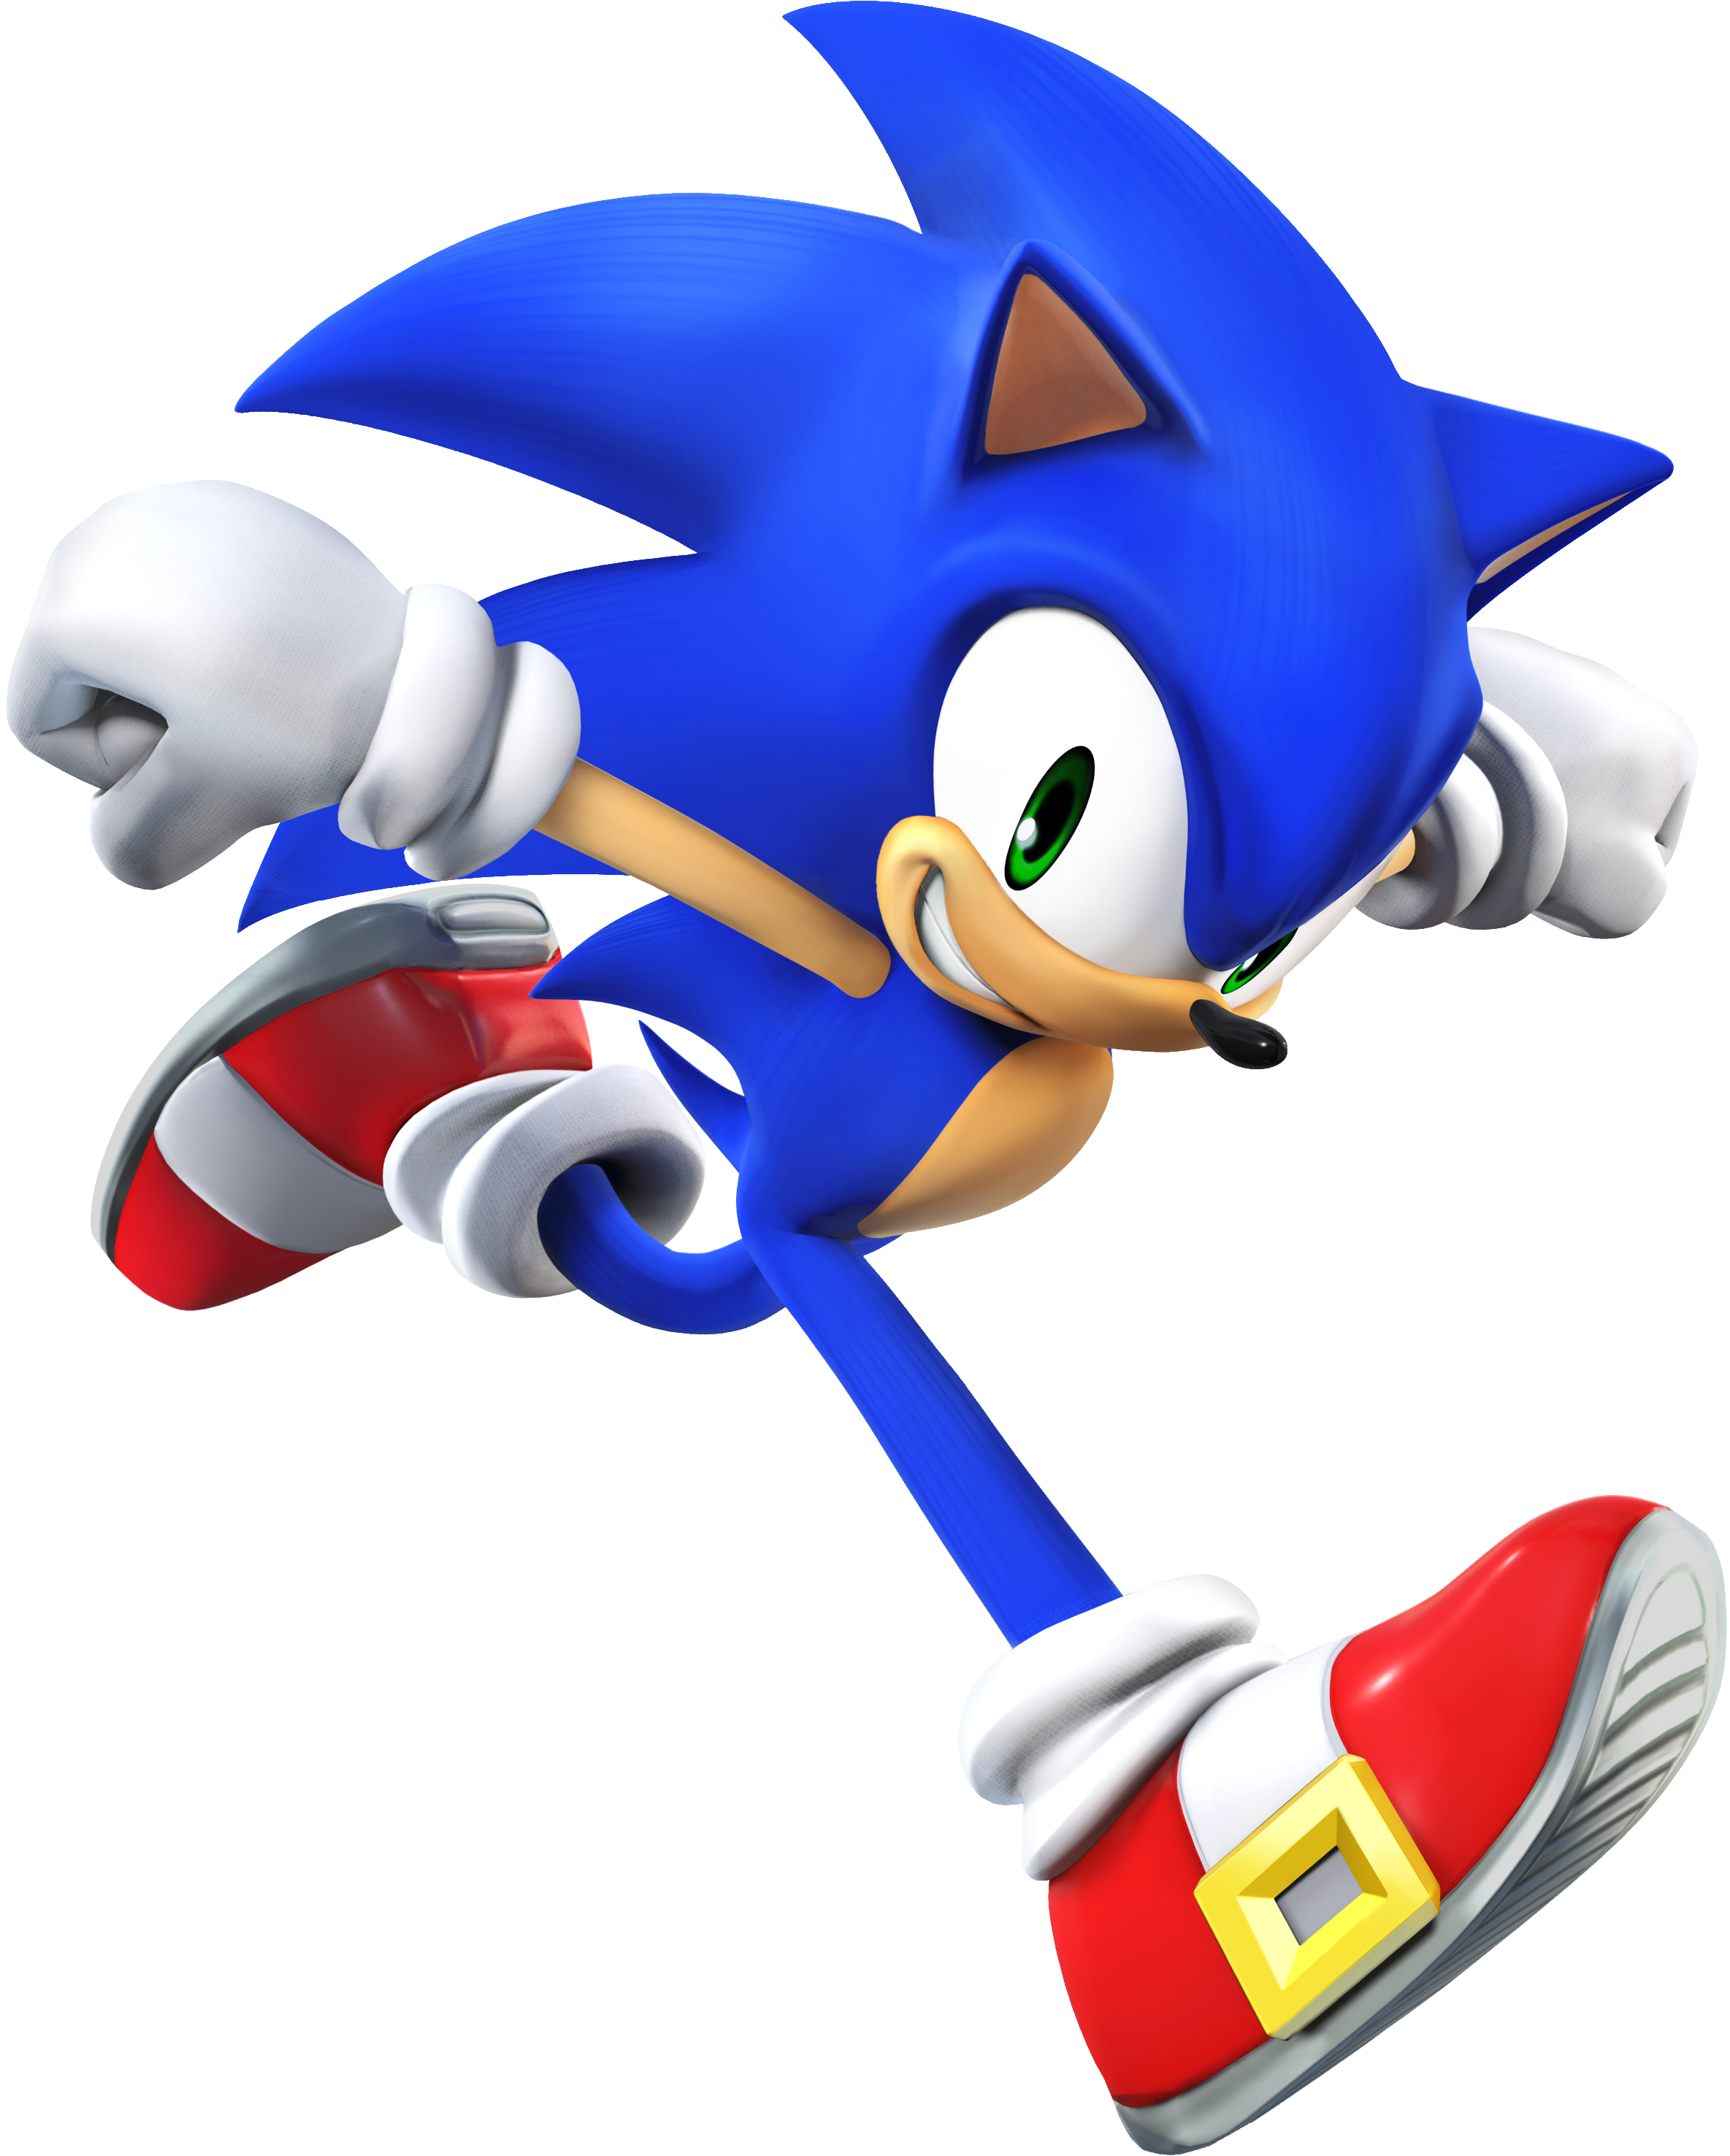 Sonic - Super Smash Bros. for Wii U / 3DS Guide - IGN